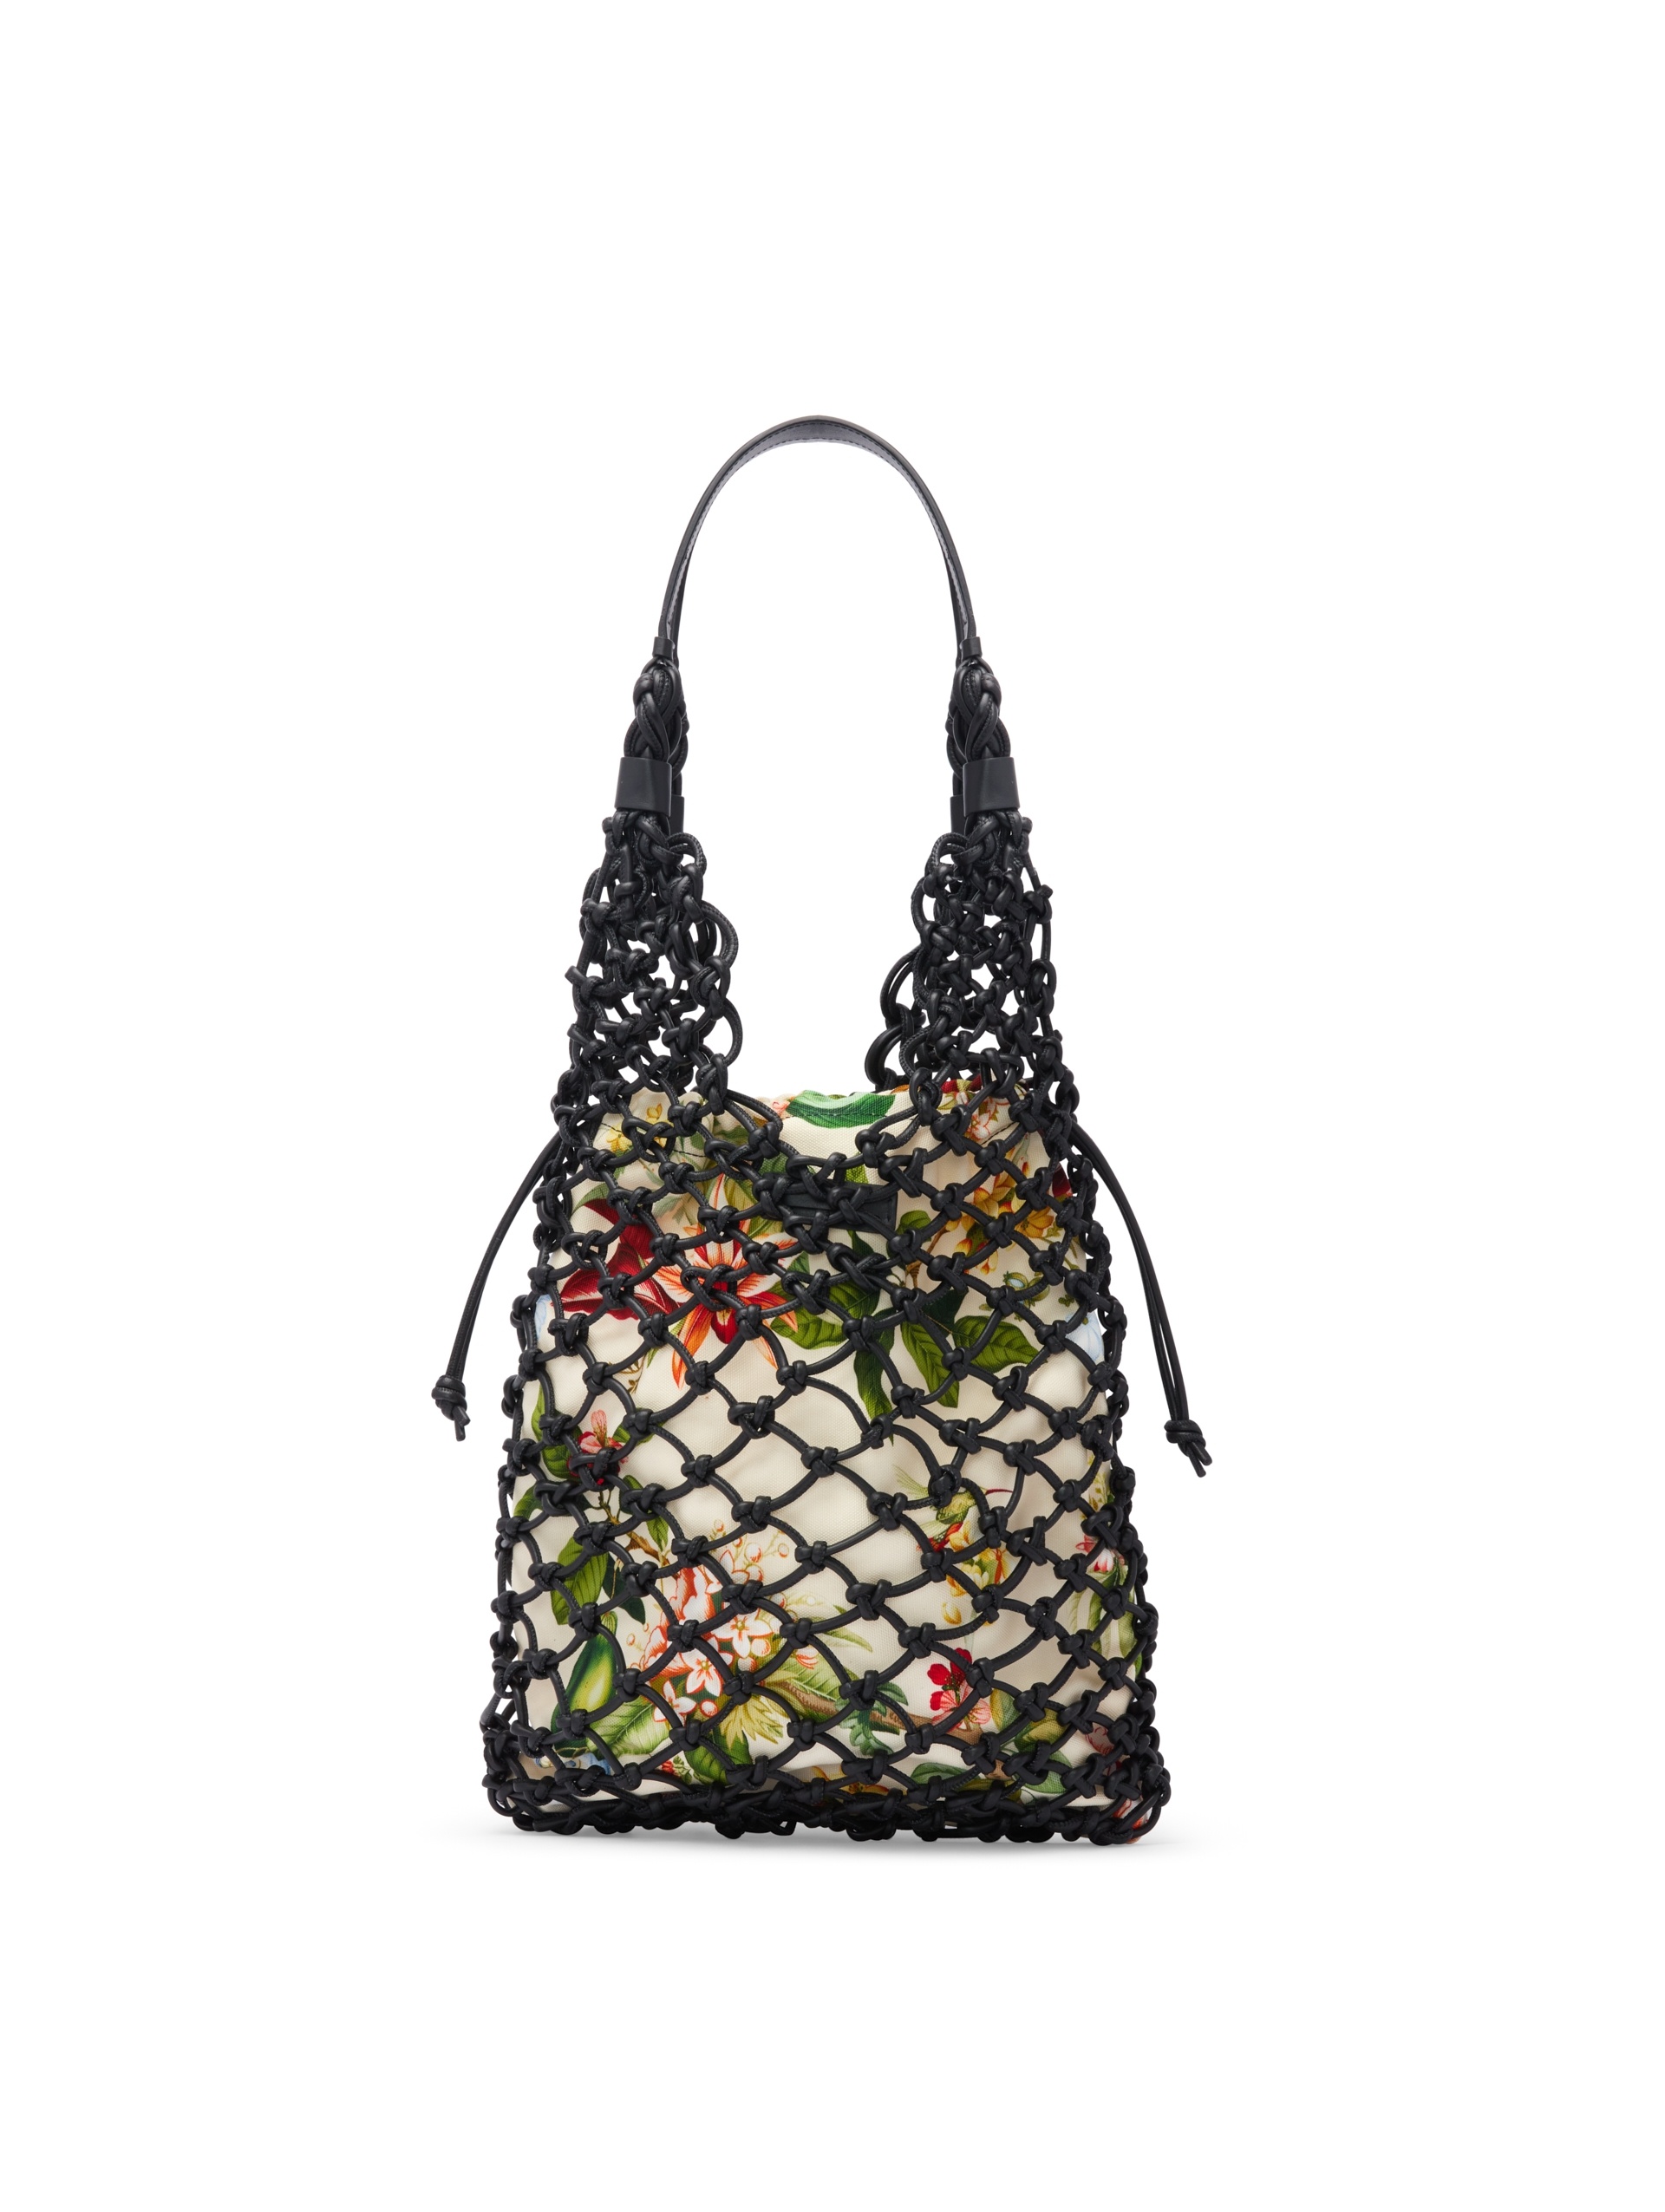 FLORA & FAUNA LARGE KNOTTED LEATHER TOTE - 4